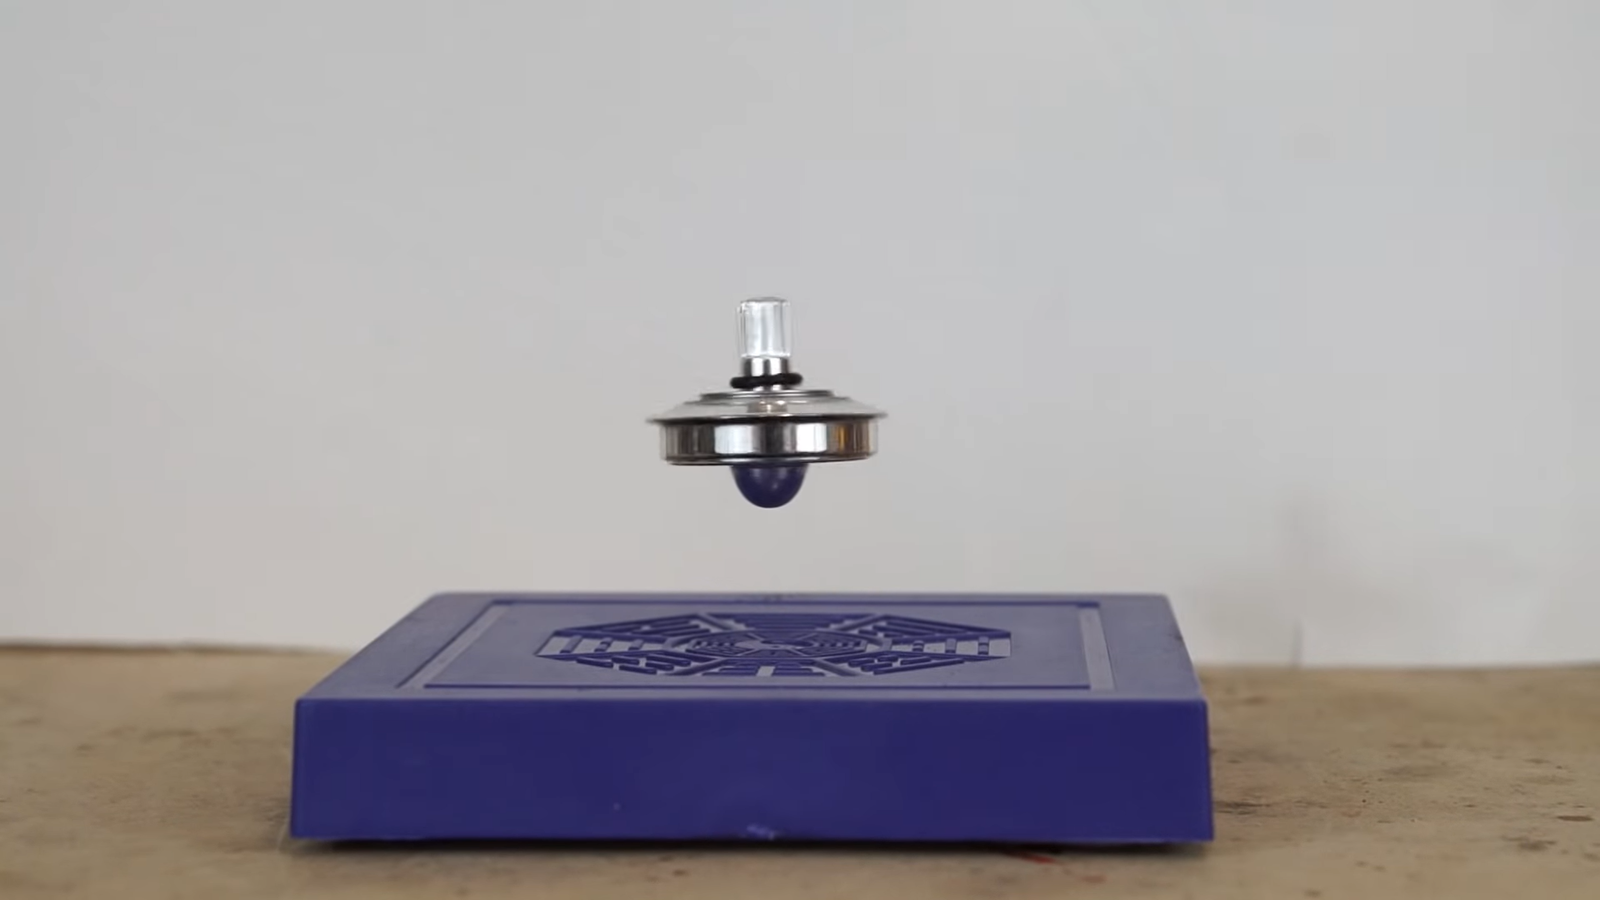 Reinventing a magnetic toy – the Levitron